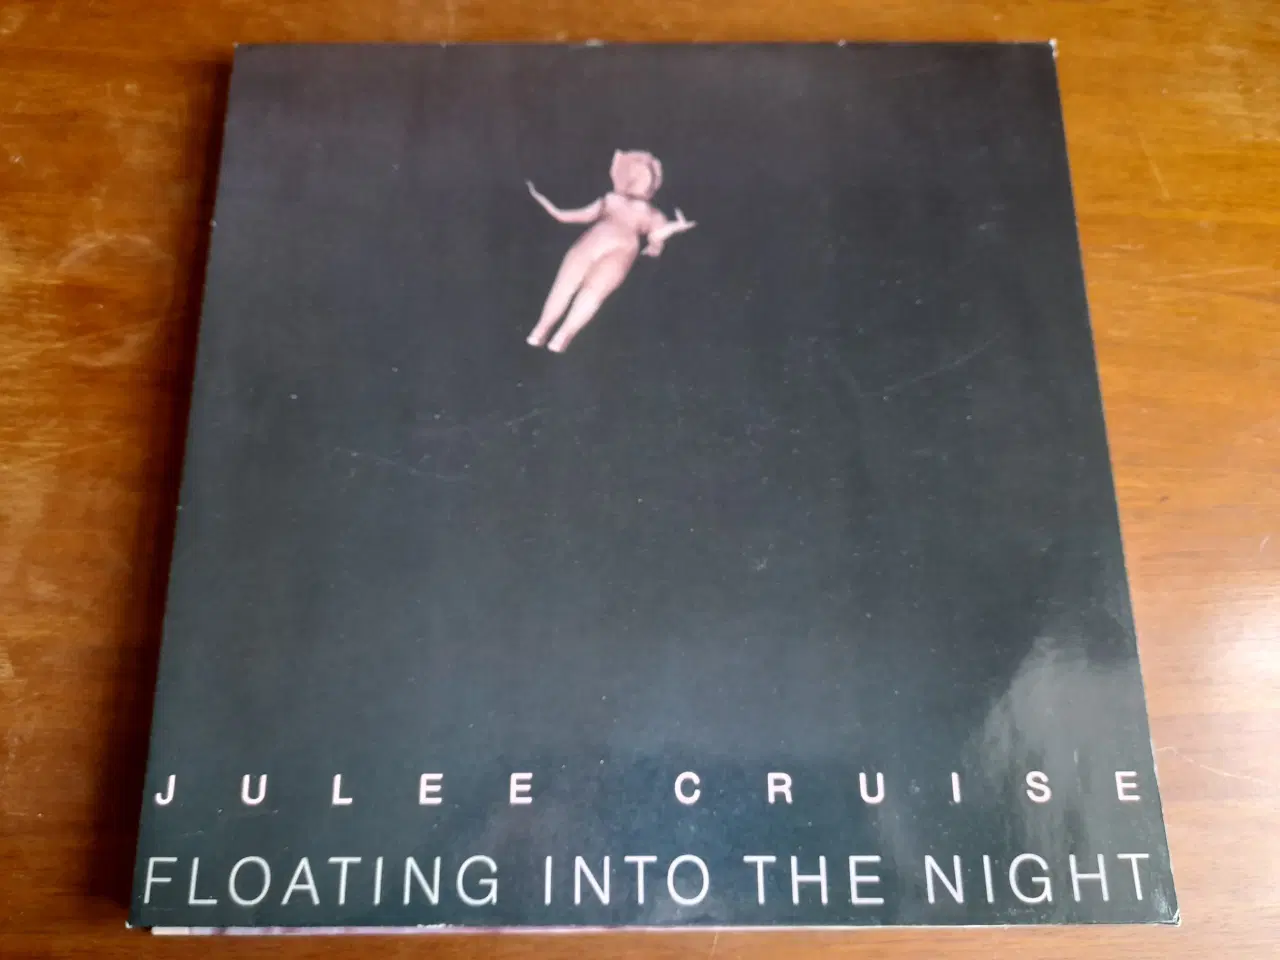 Billede 2 - Julee Cruise - Floating Into The Night (NY PRIS)